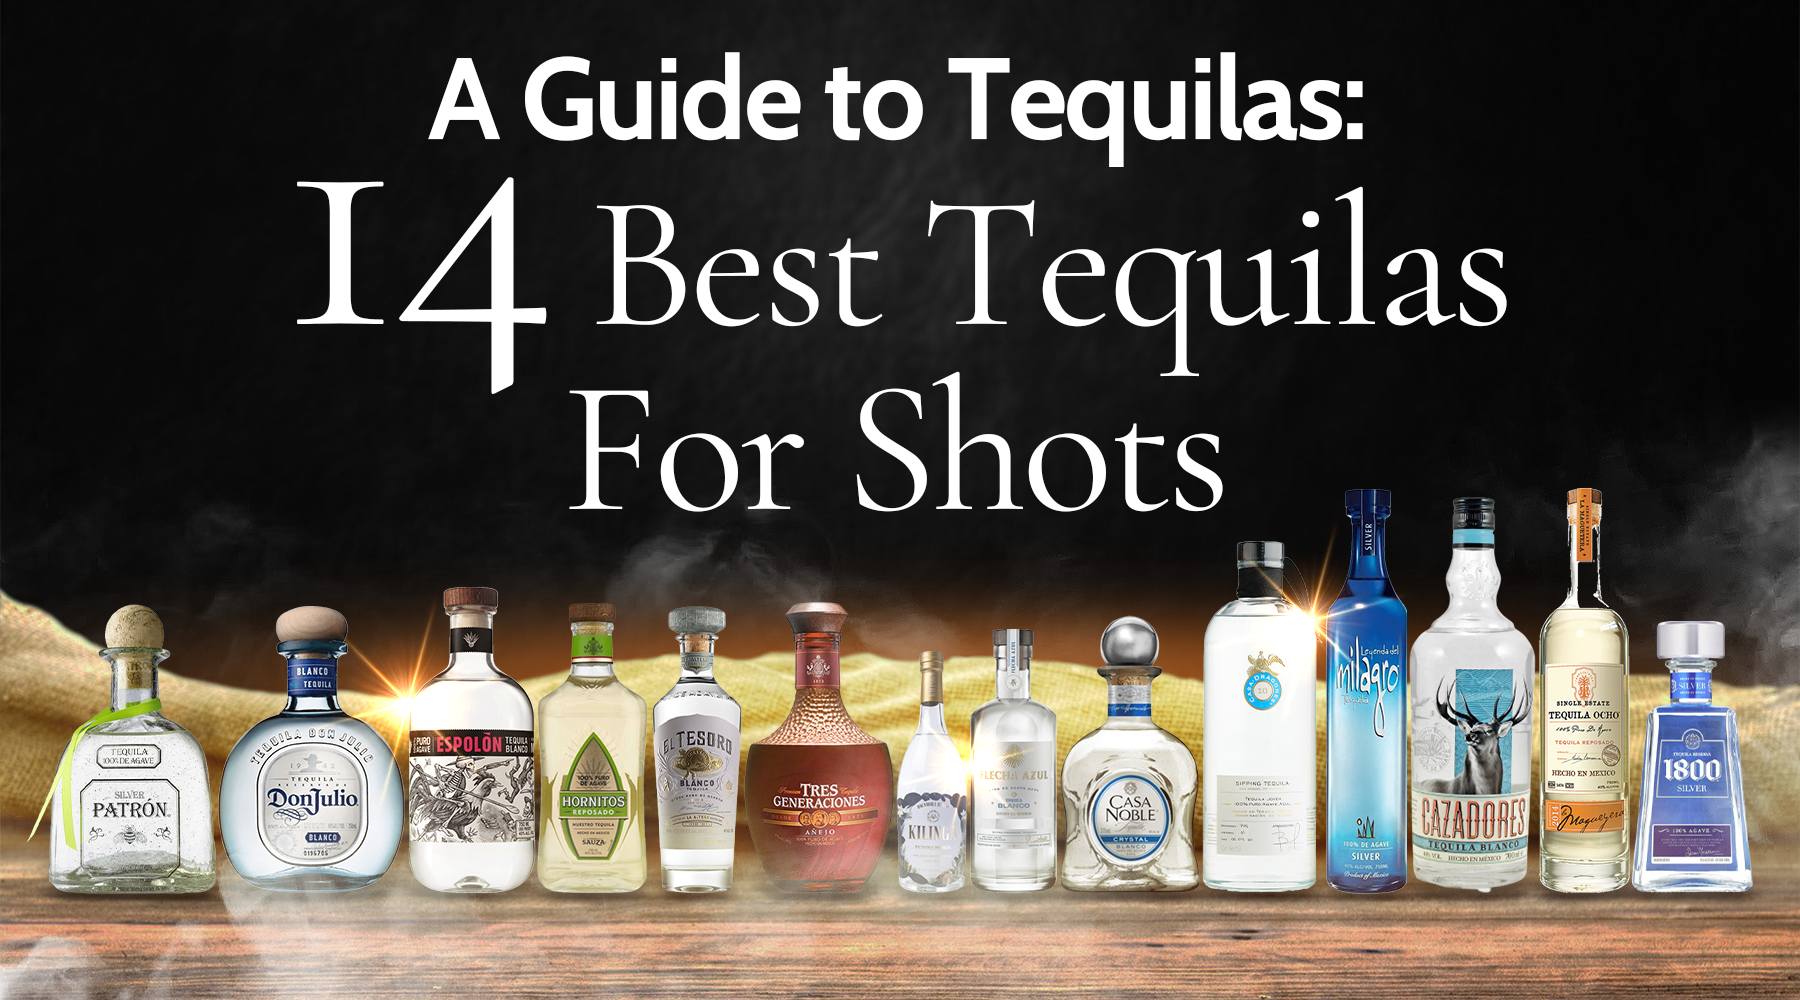 A Guide to Tequilas: 14 Best Tequilas For Shots